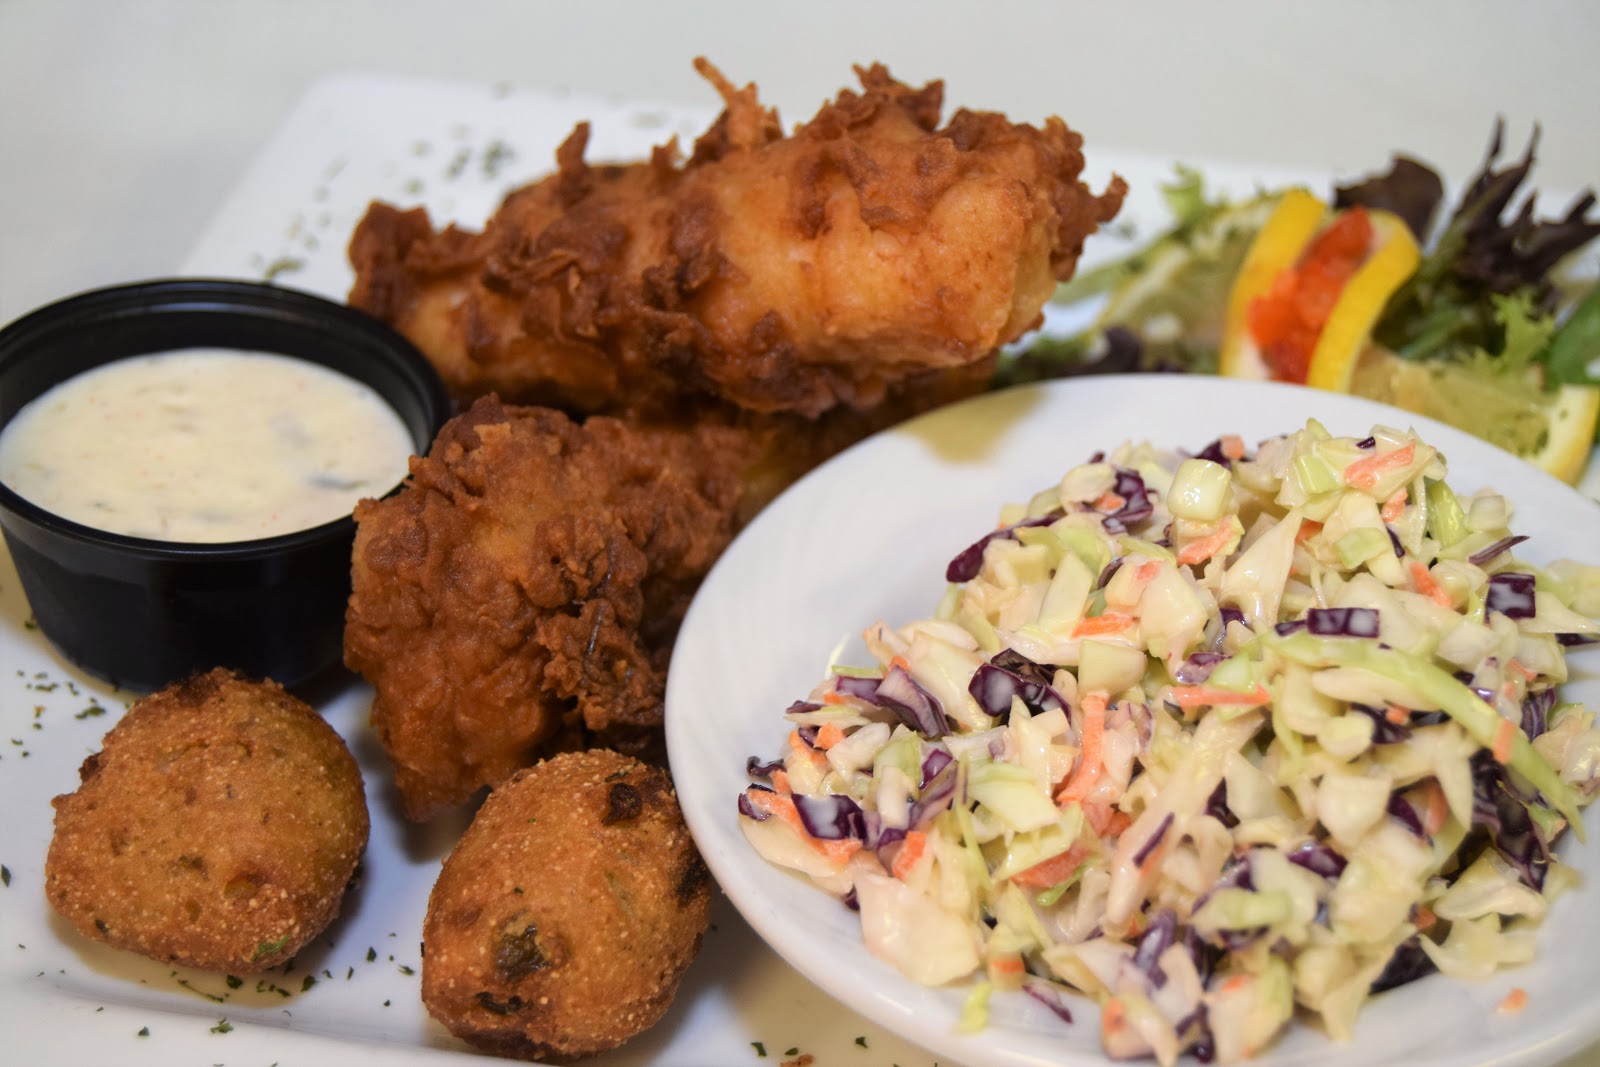 Savory Seafood Lunches at JB Hook's at the Lake of the Ozarks